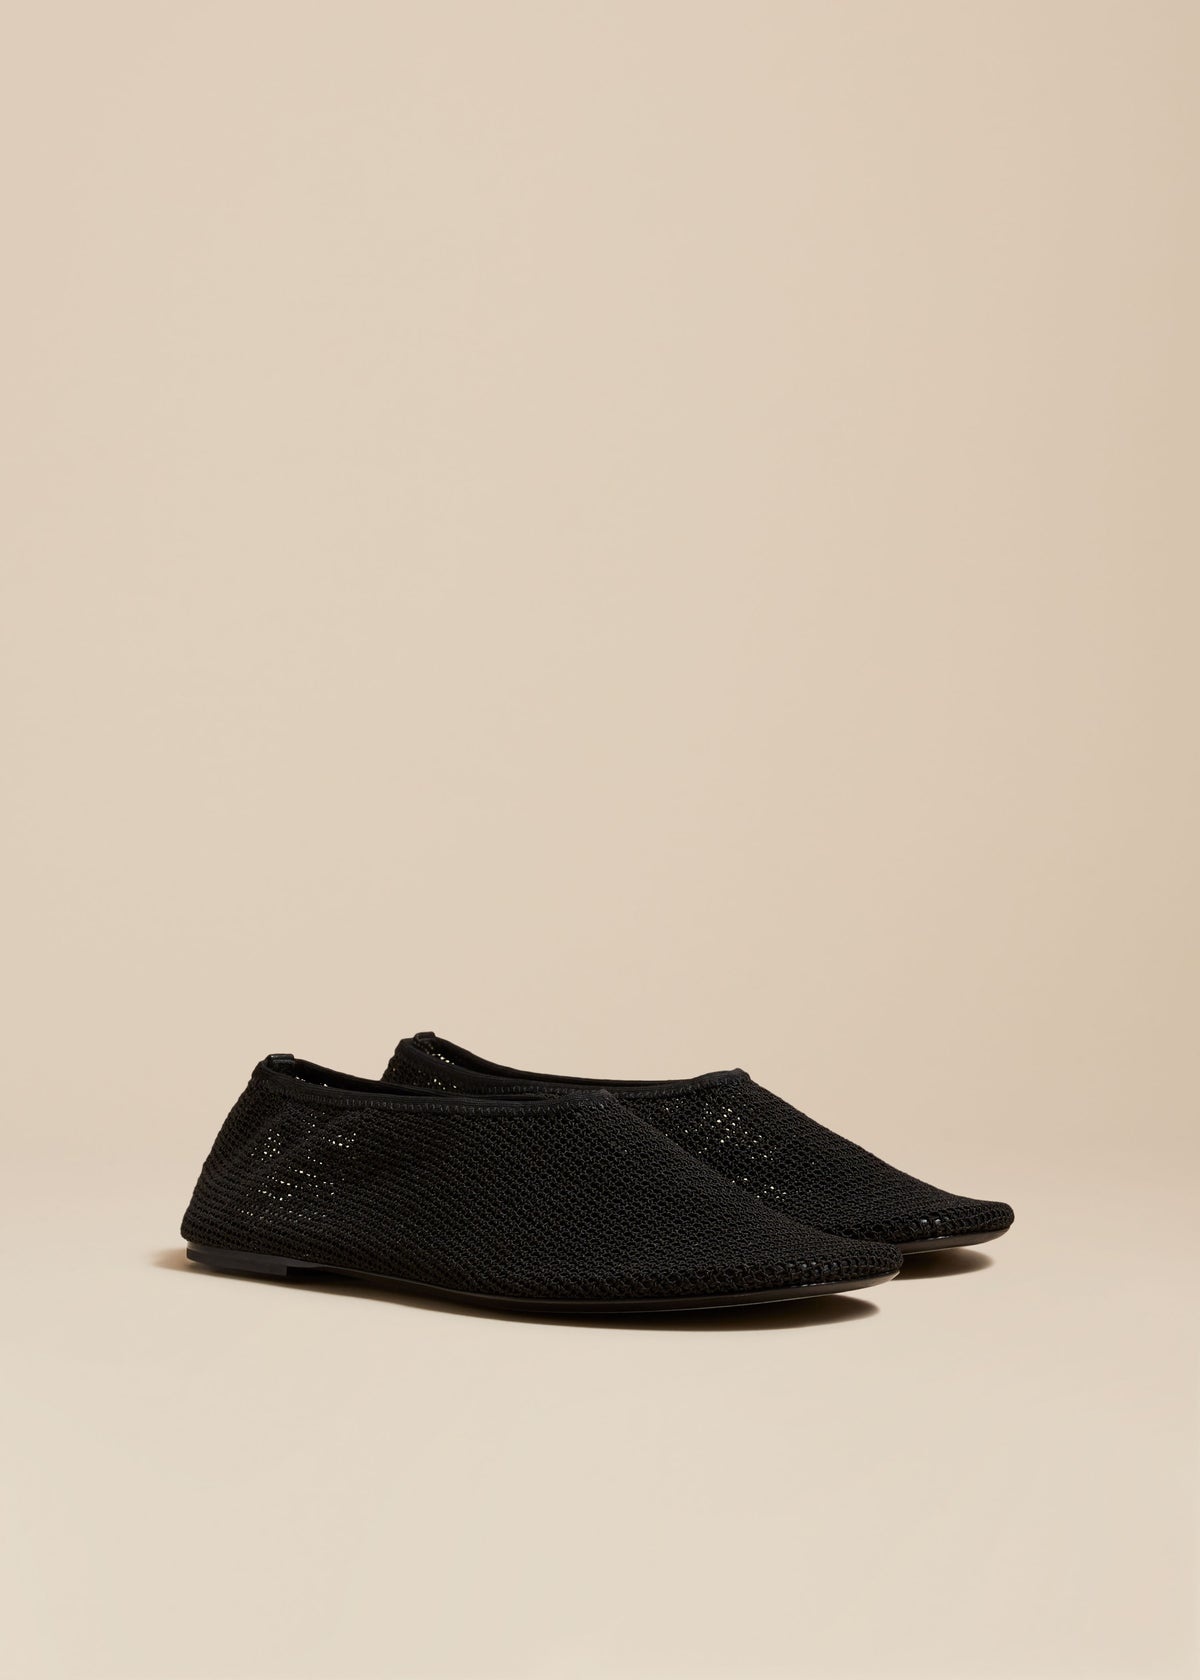 The Maiden Flat in Black - 2